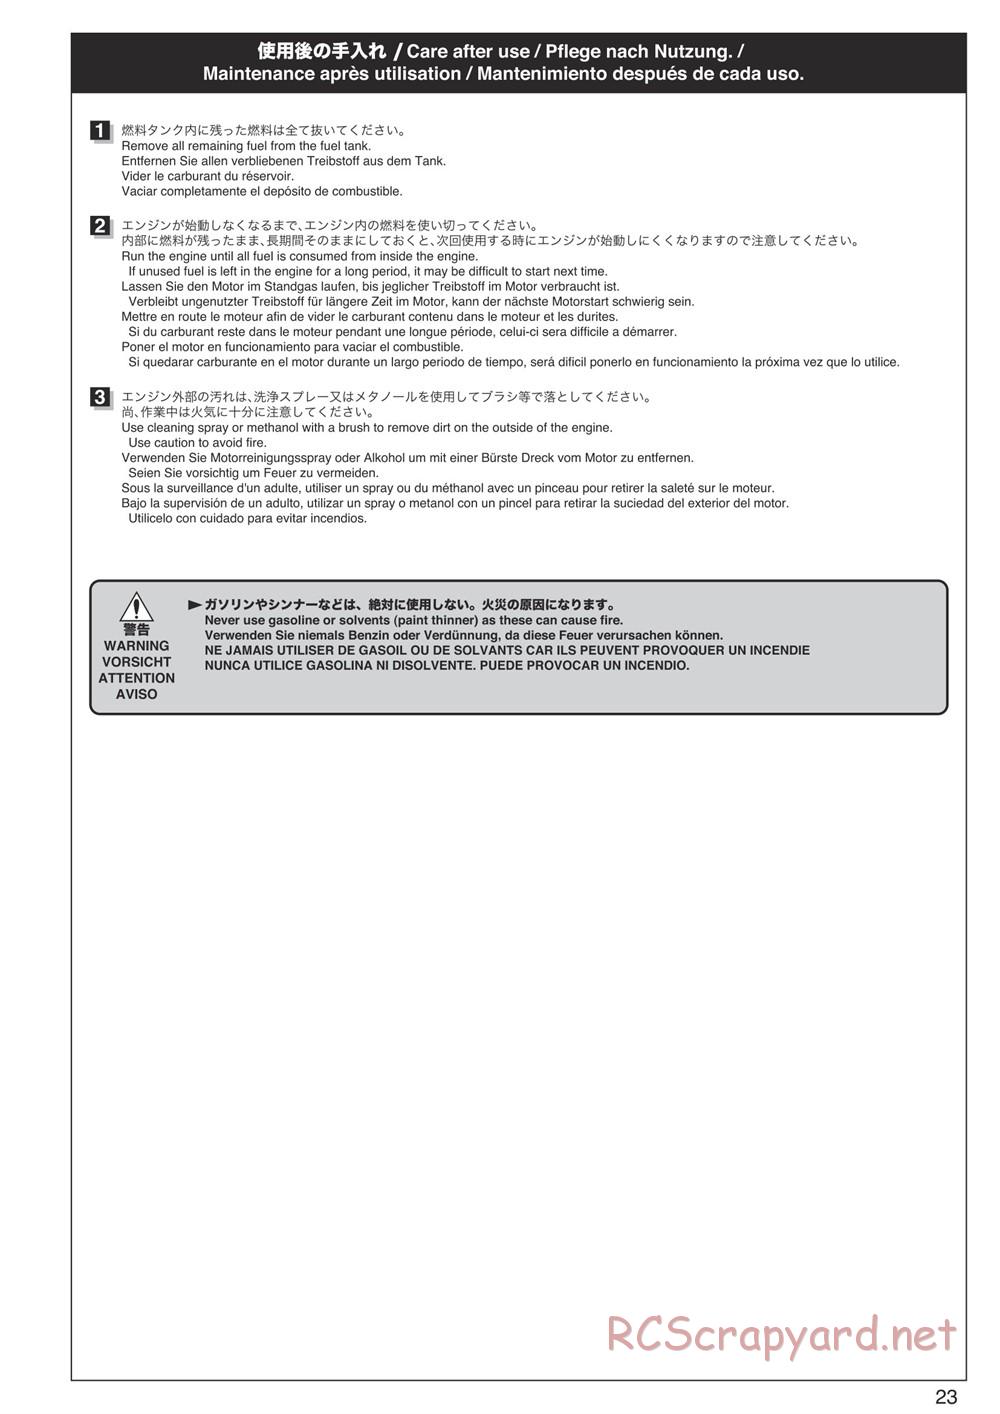 Kyosho - Inferno Neo ST 3.0 - Manual - Page 23